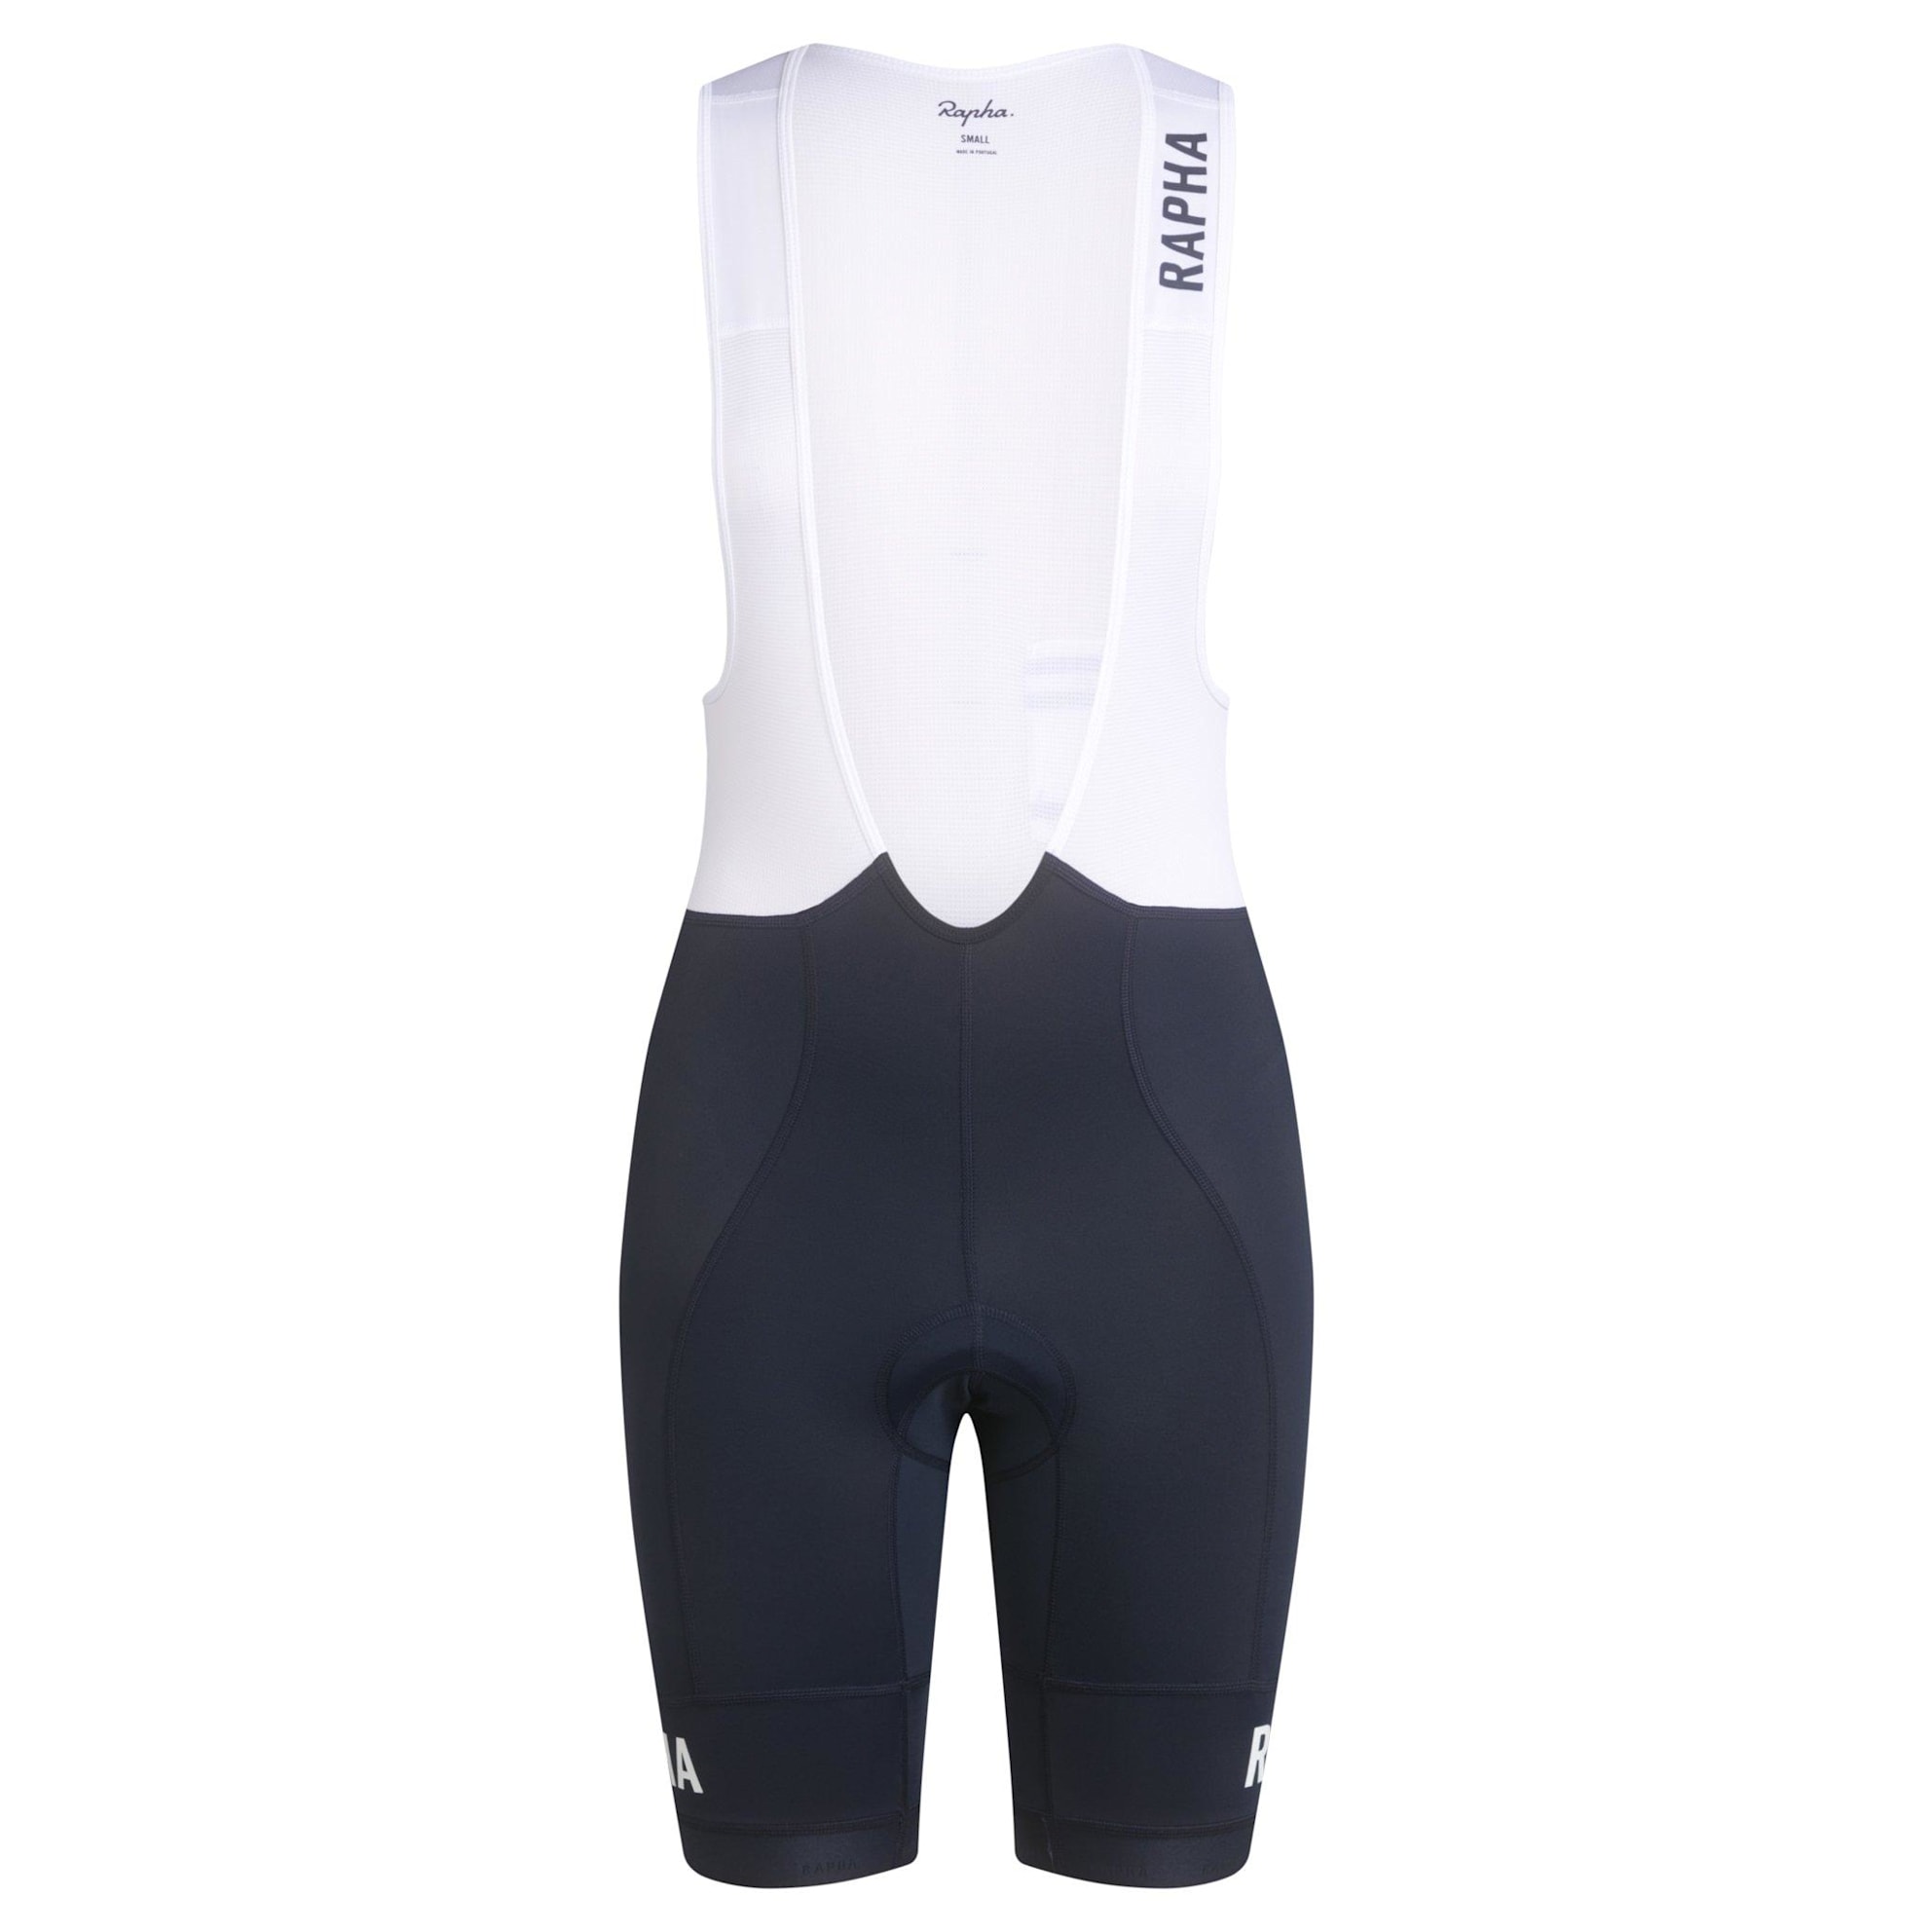 Women's Cycling Jerseys, Clothing & Accessories | Rapha